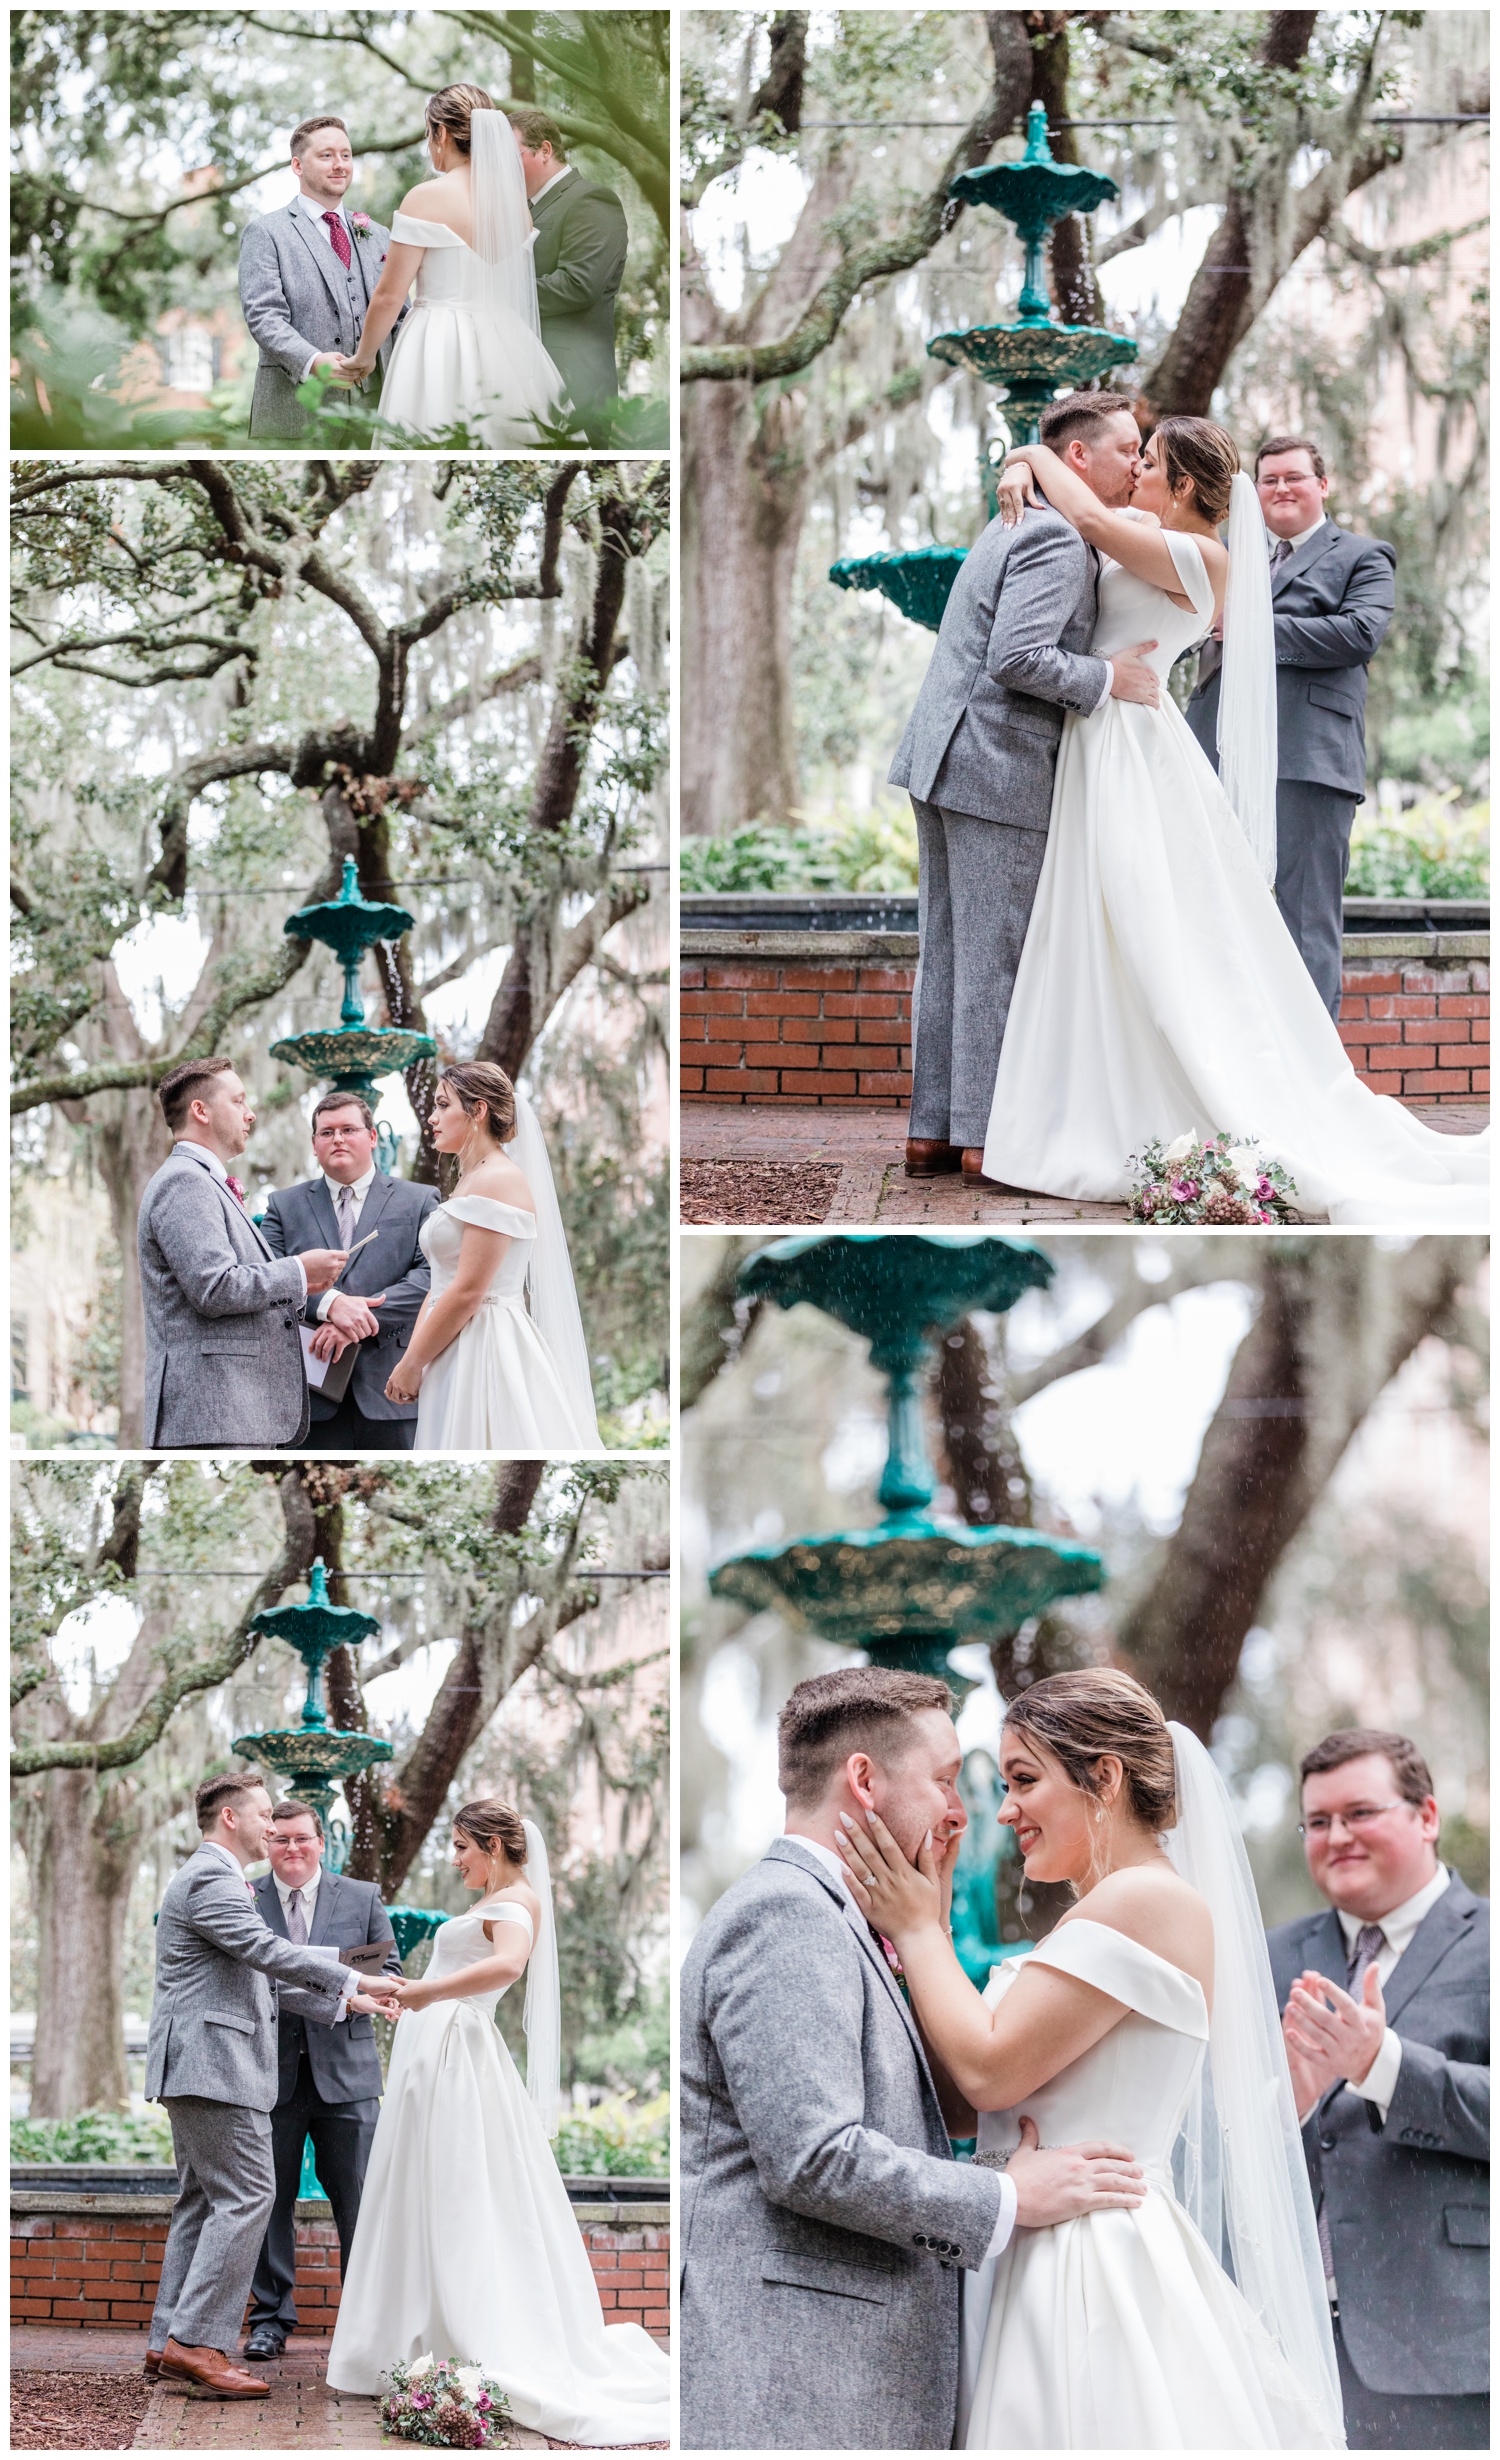 Ceremony in Lafayette Square - The Savannah Elopement Package